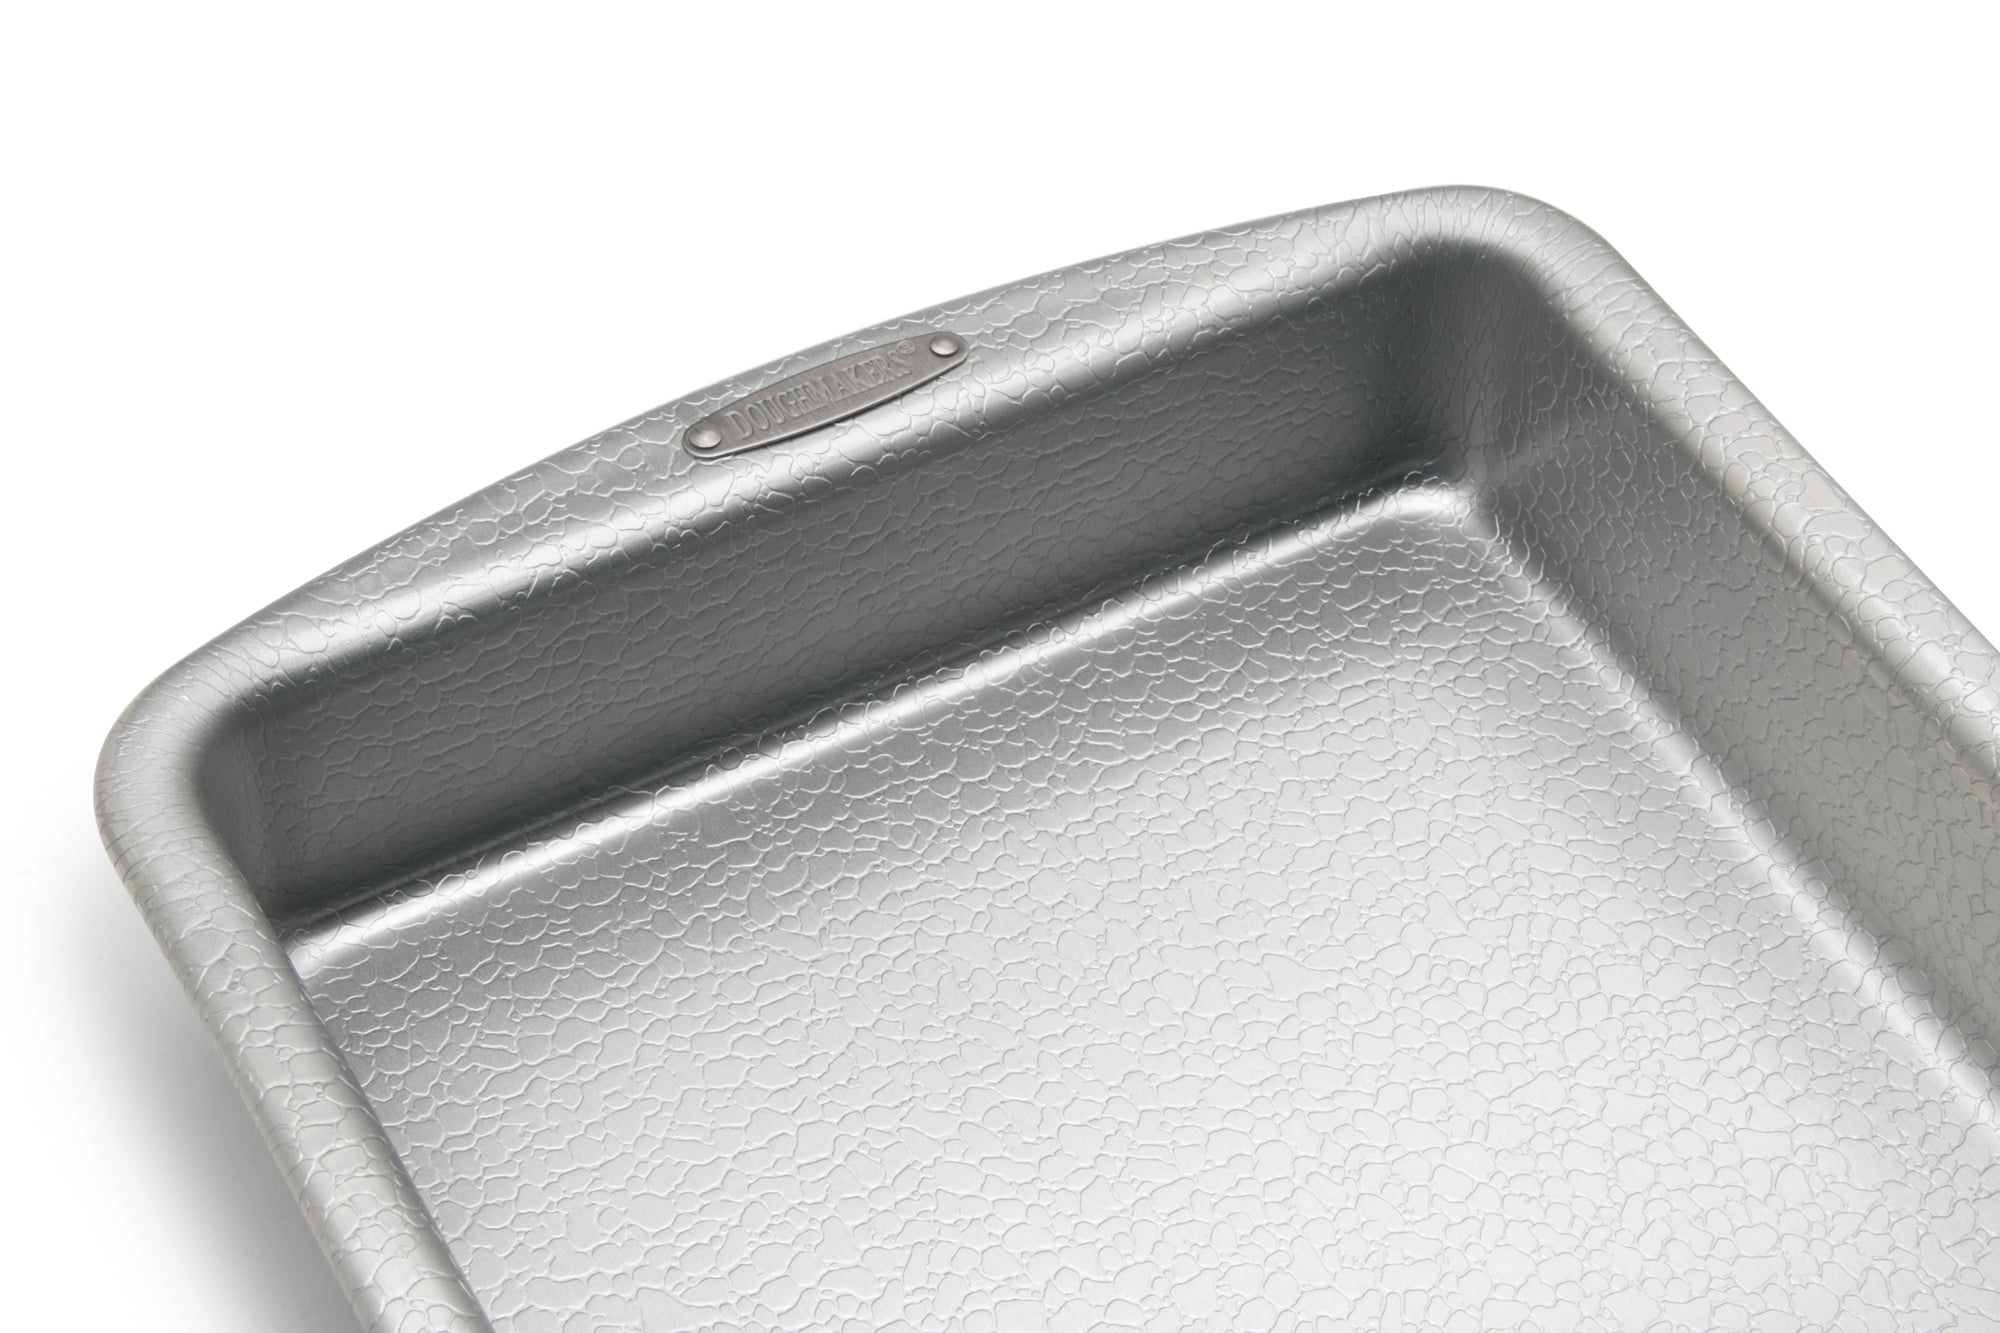 9X13 Monogram 8, Doughmakers Pan - $52.99 : That's My Pan!, Personalized  Cake Pans and More